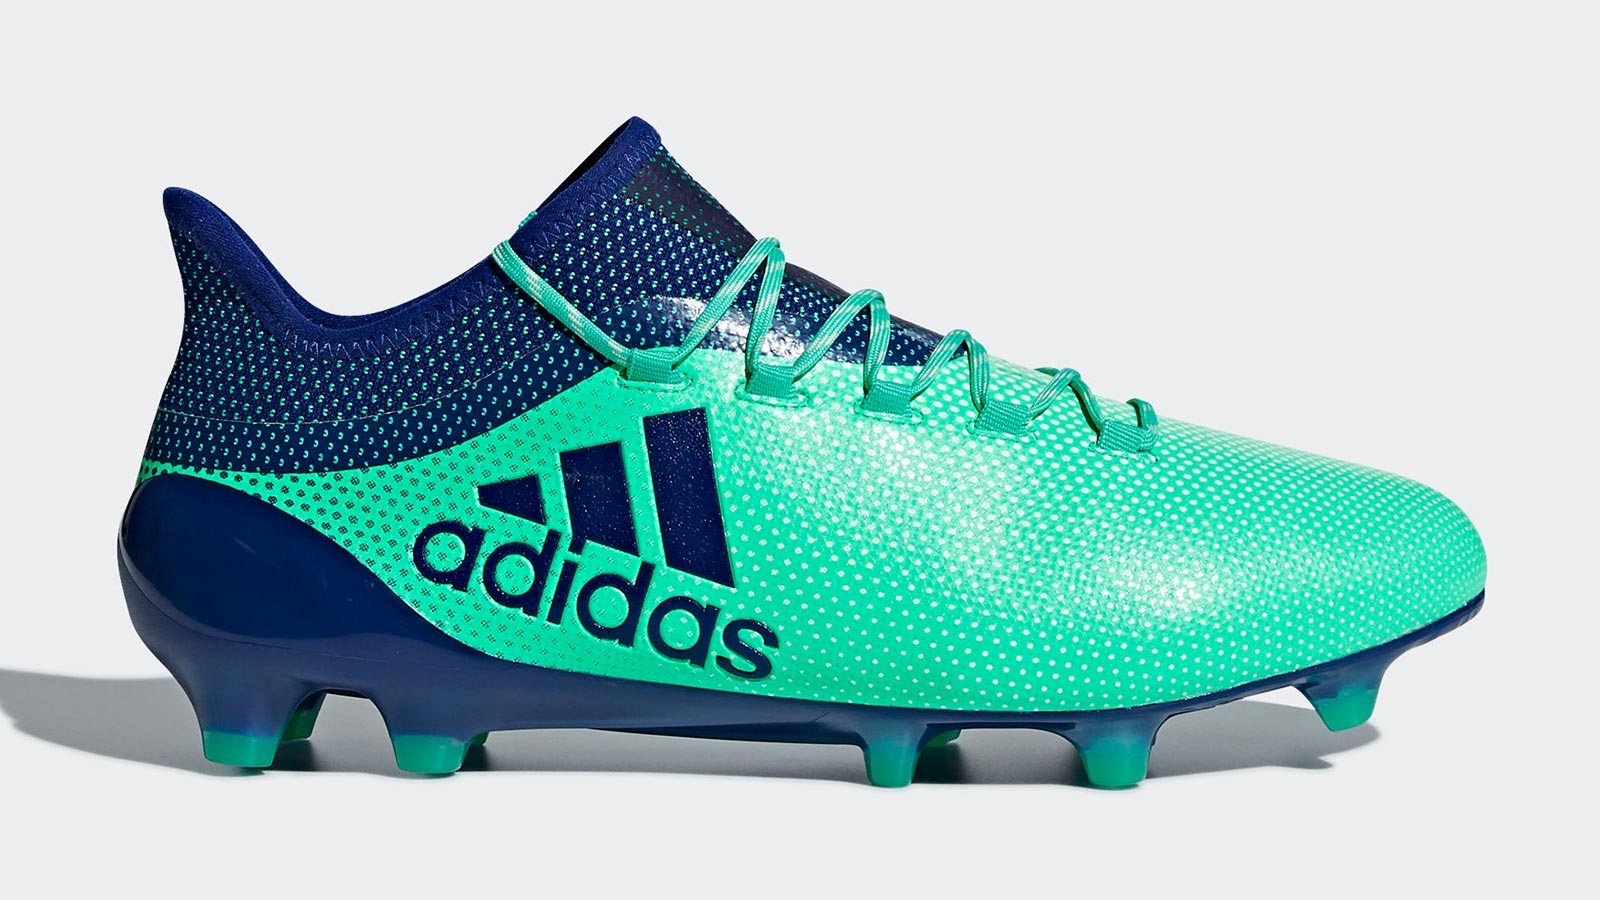 Deadly Strike Adidas X 17.1 2018 Boots Released - Footy ...